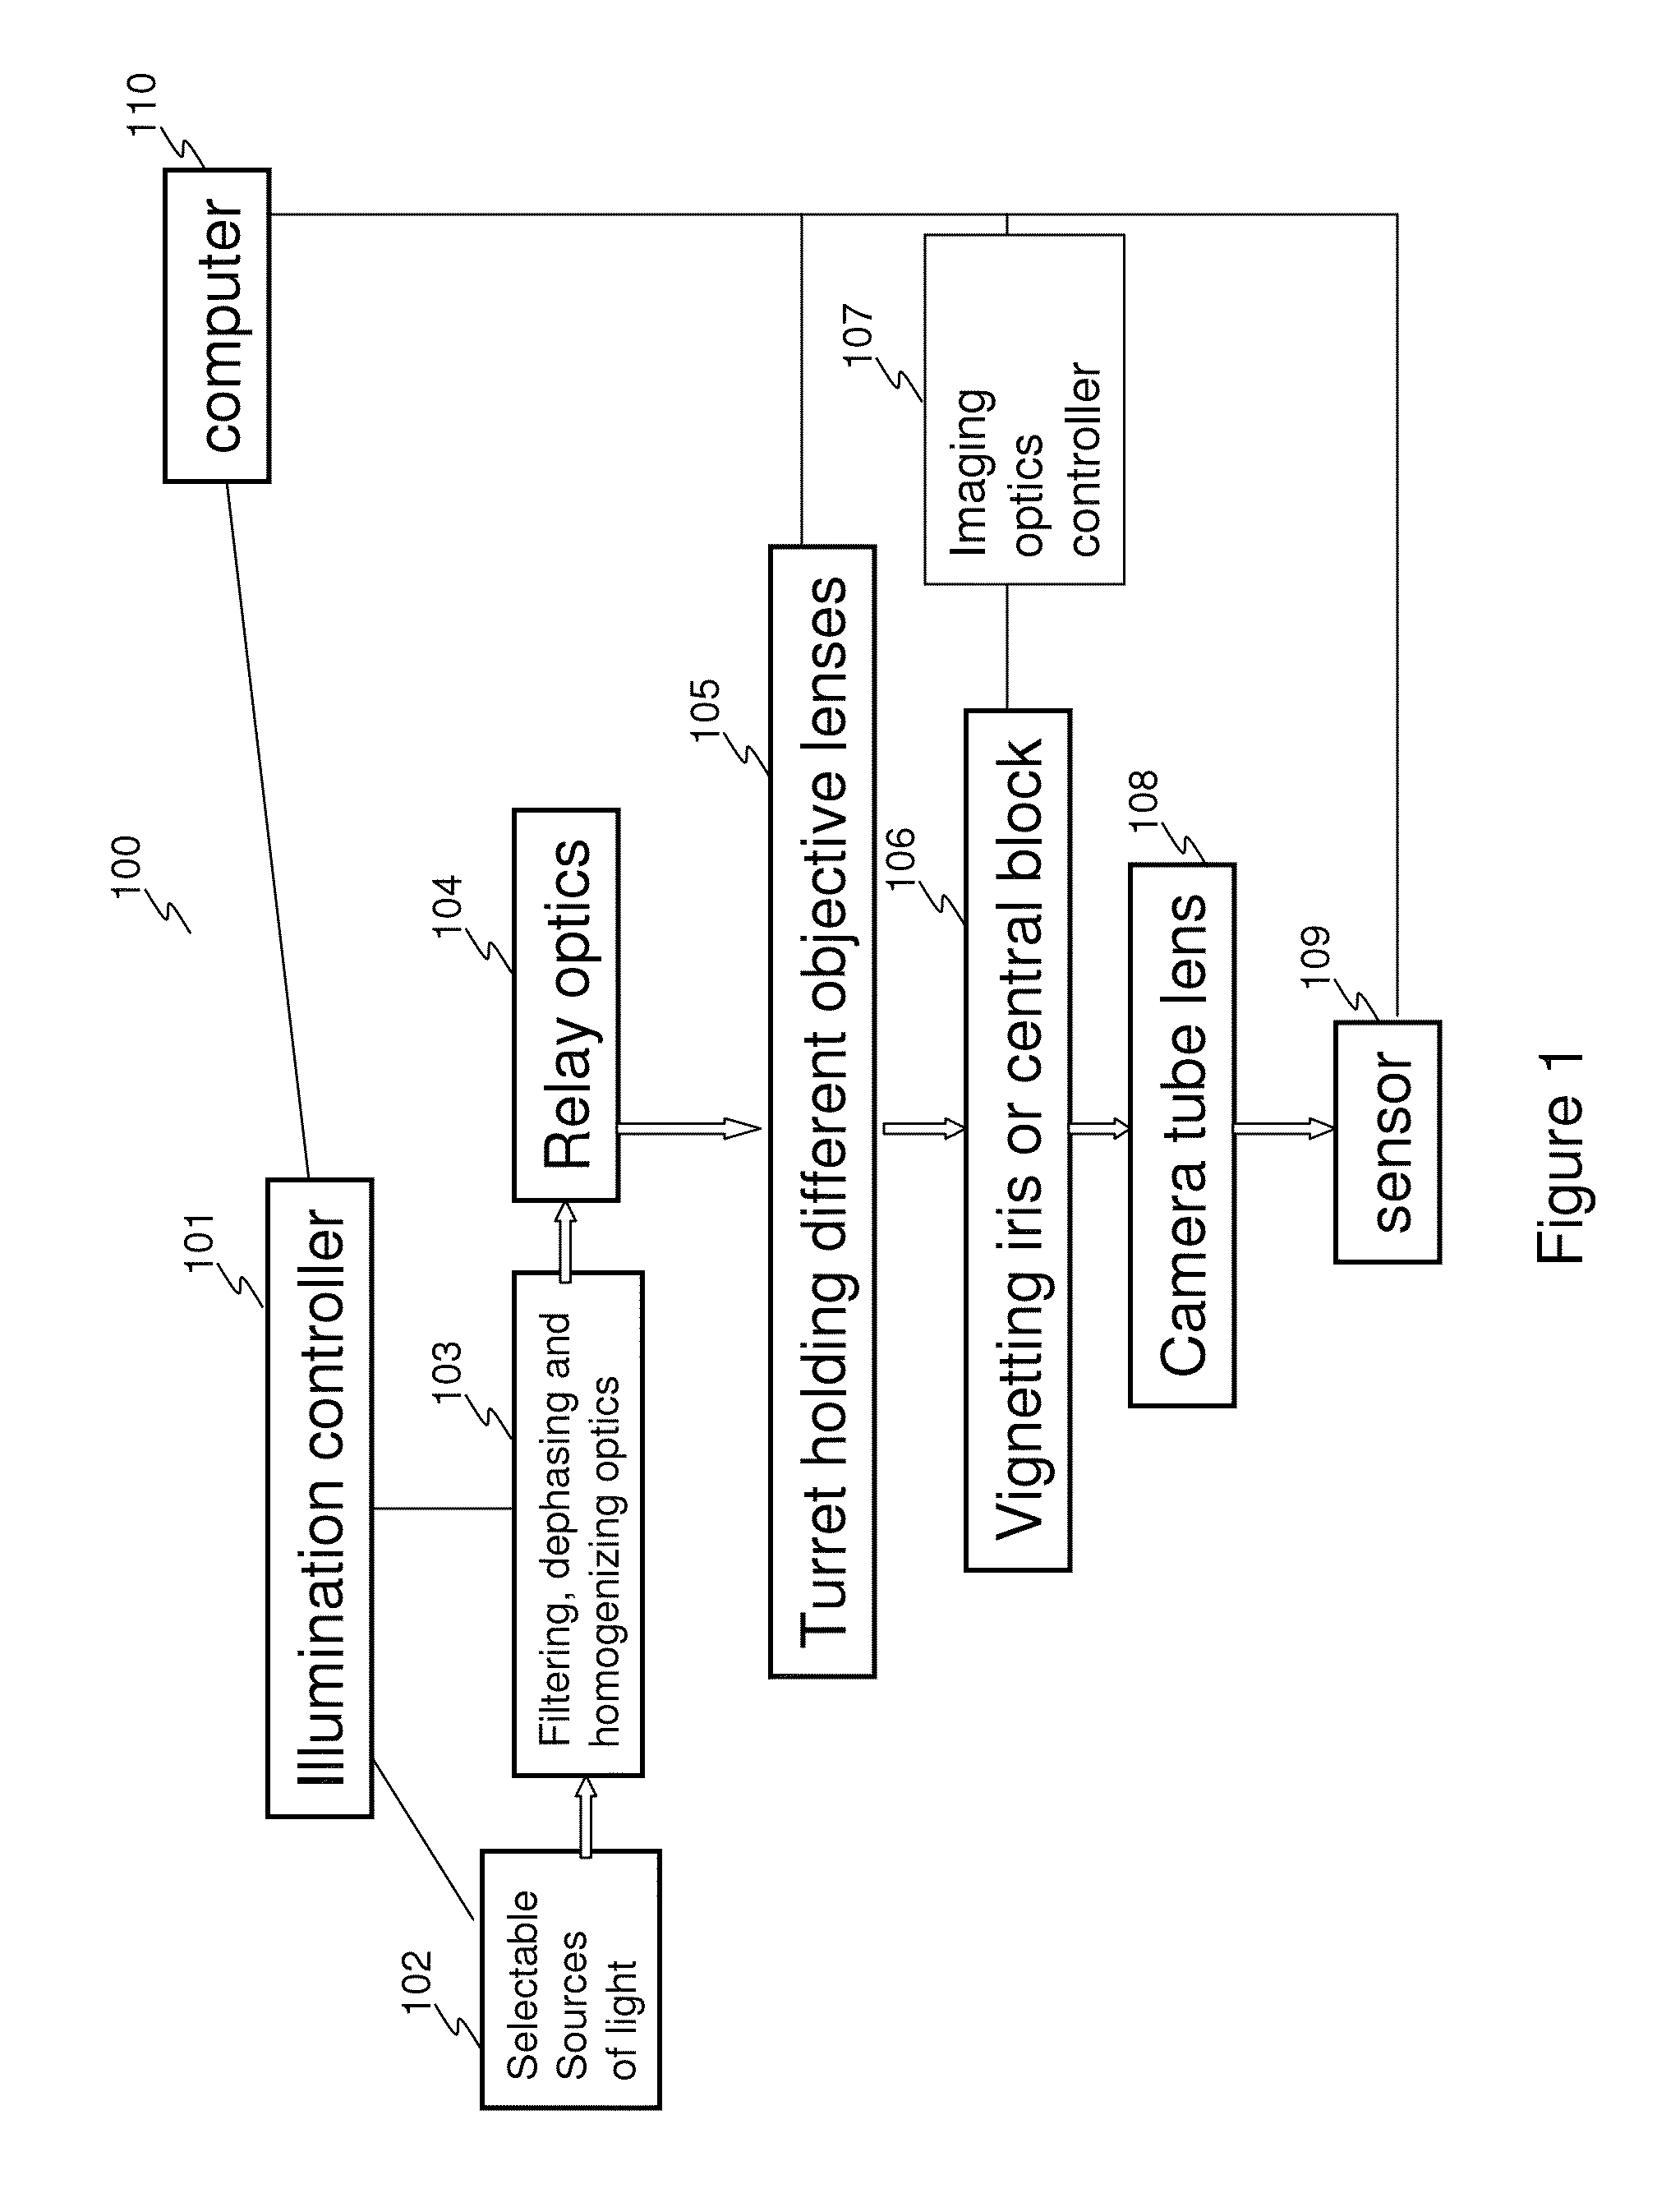 High speed acquisition vision system and method for selectively viewing object features